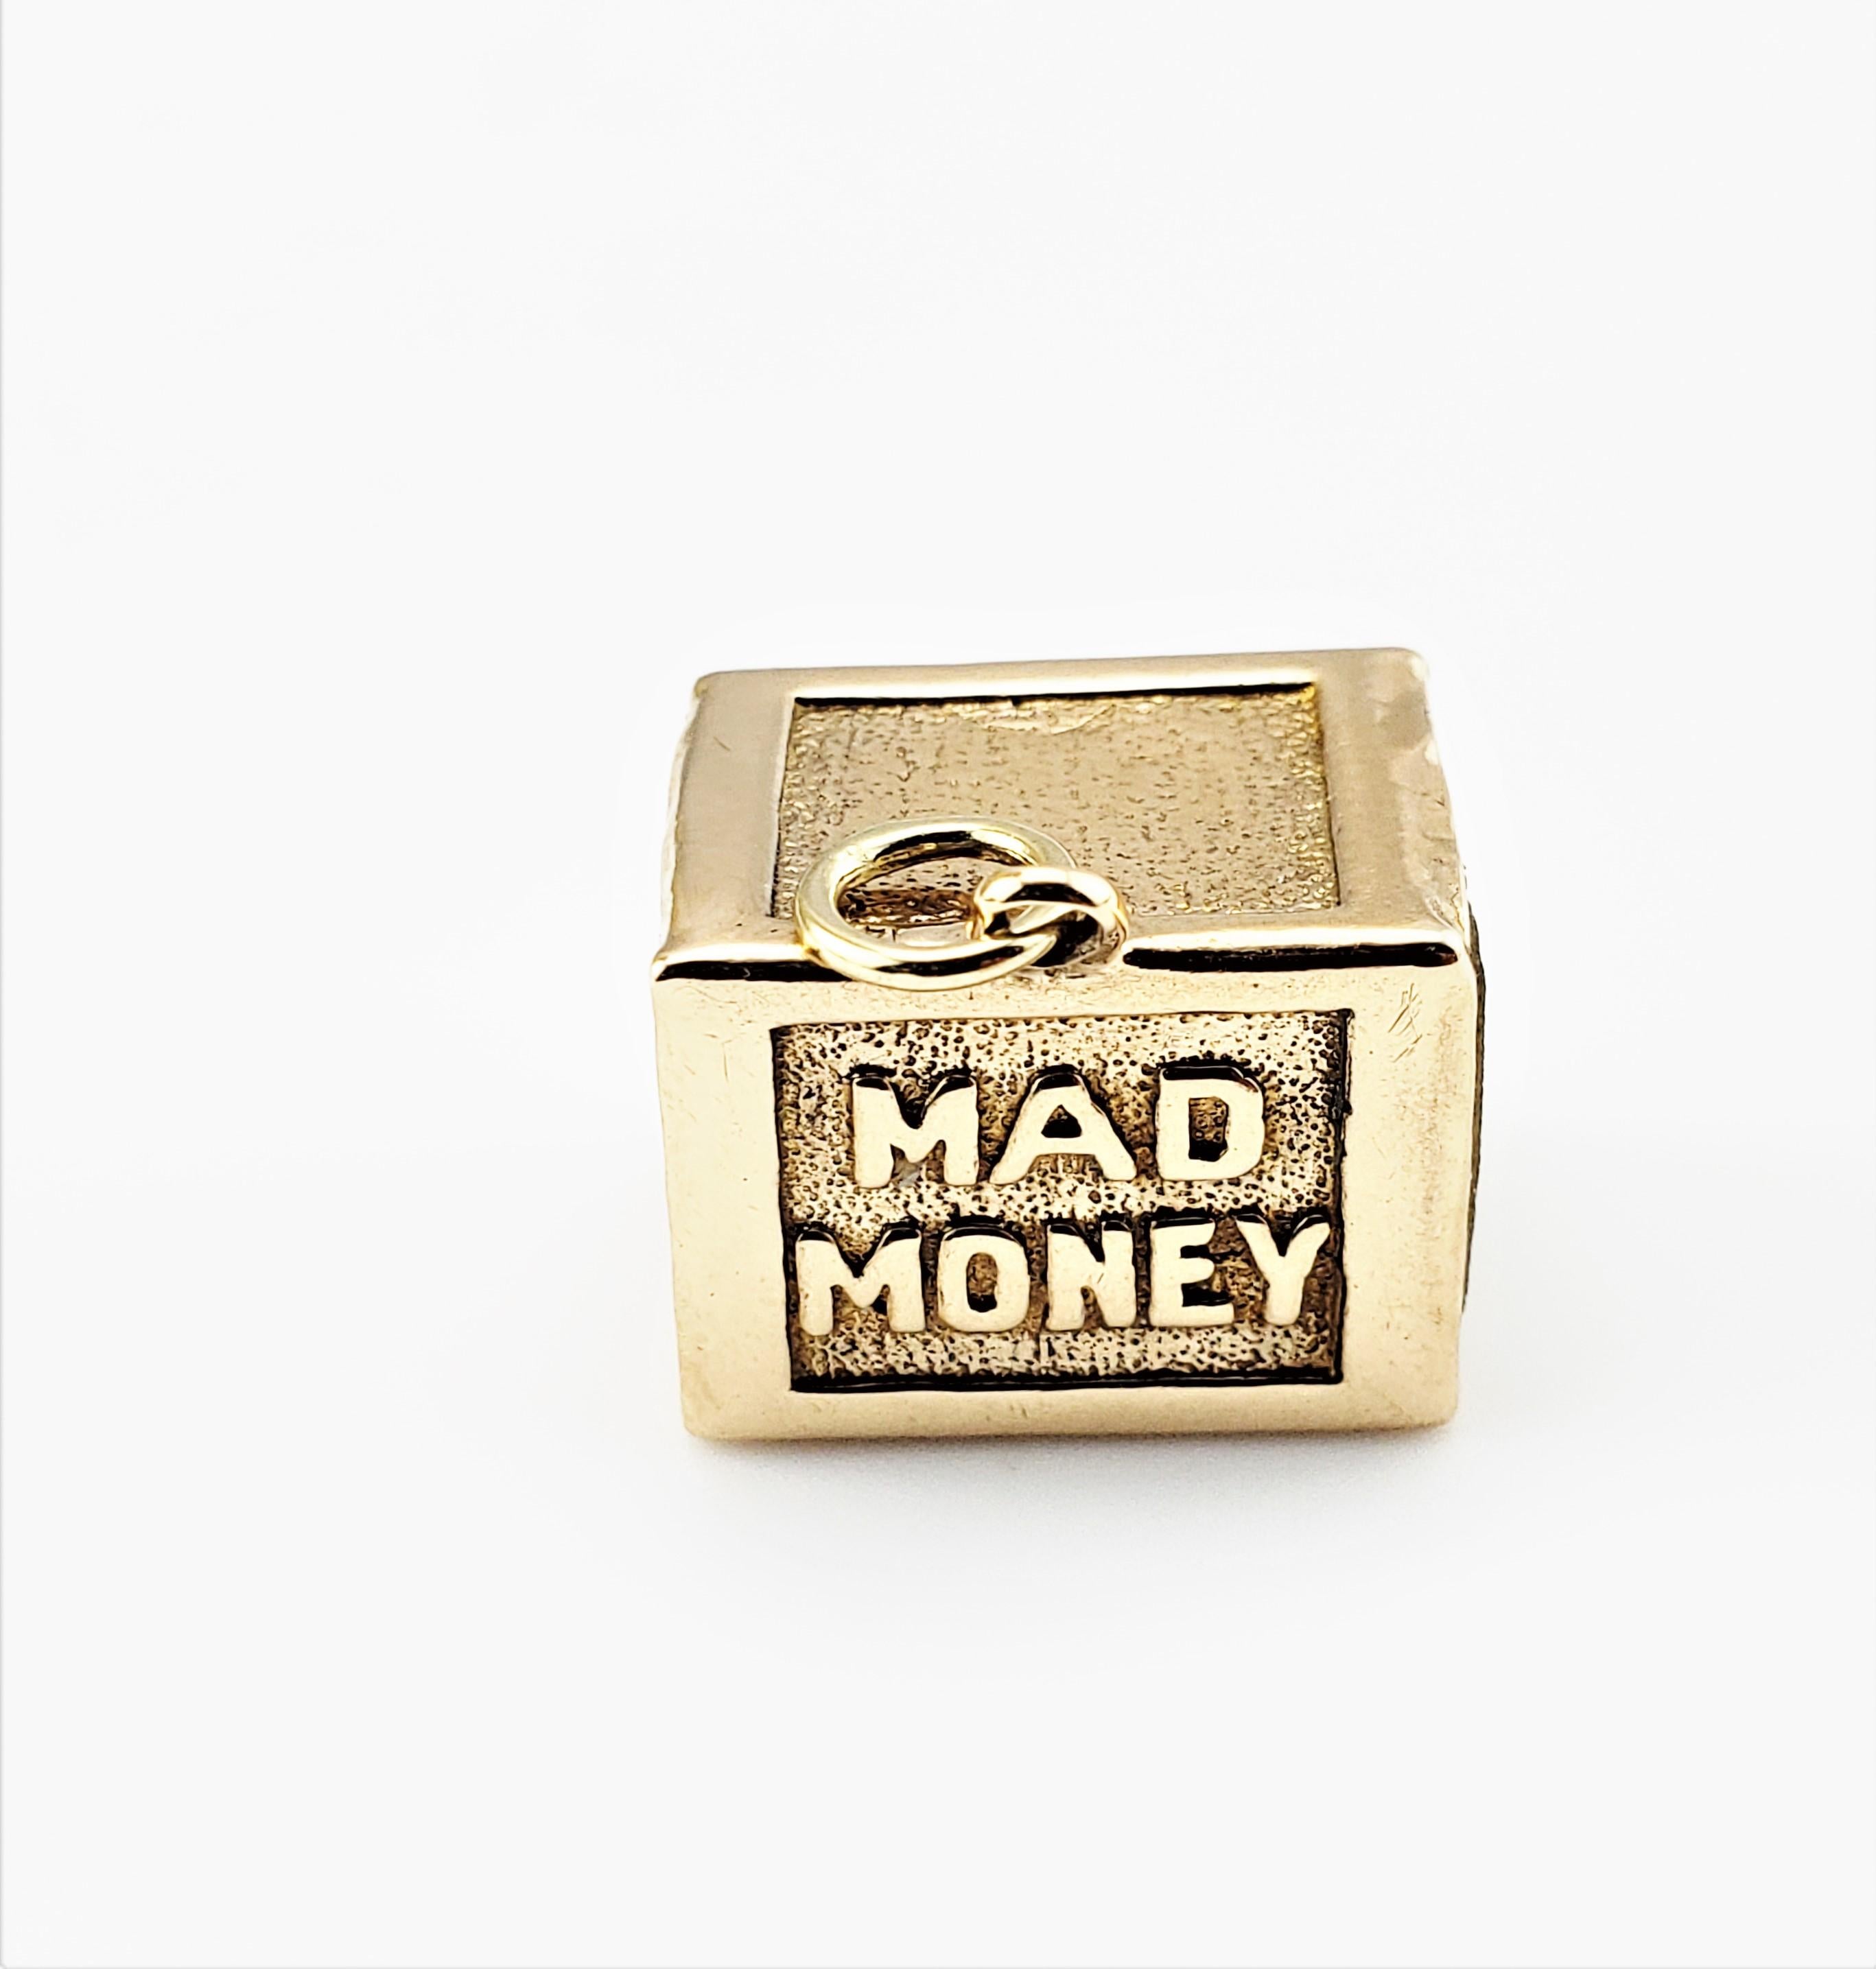 14 Karat Yellow Gold Mad Money Charm-

Never leave home without your 